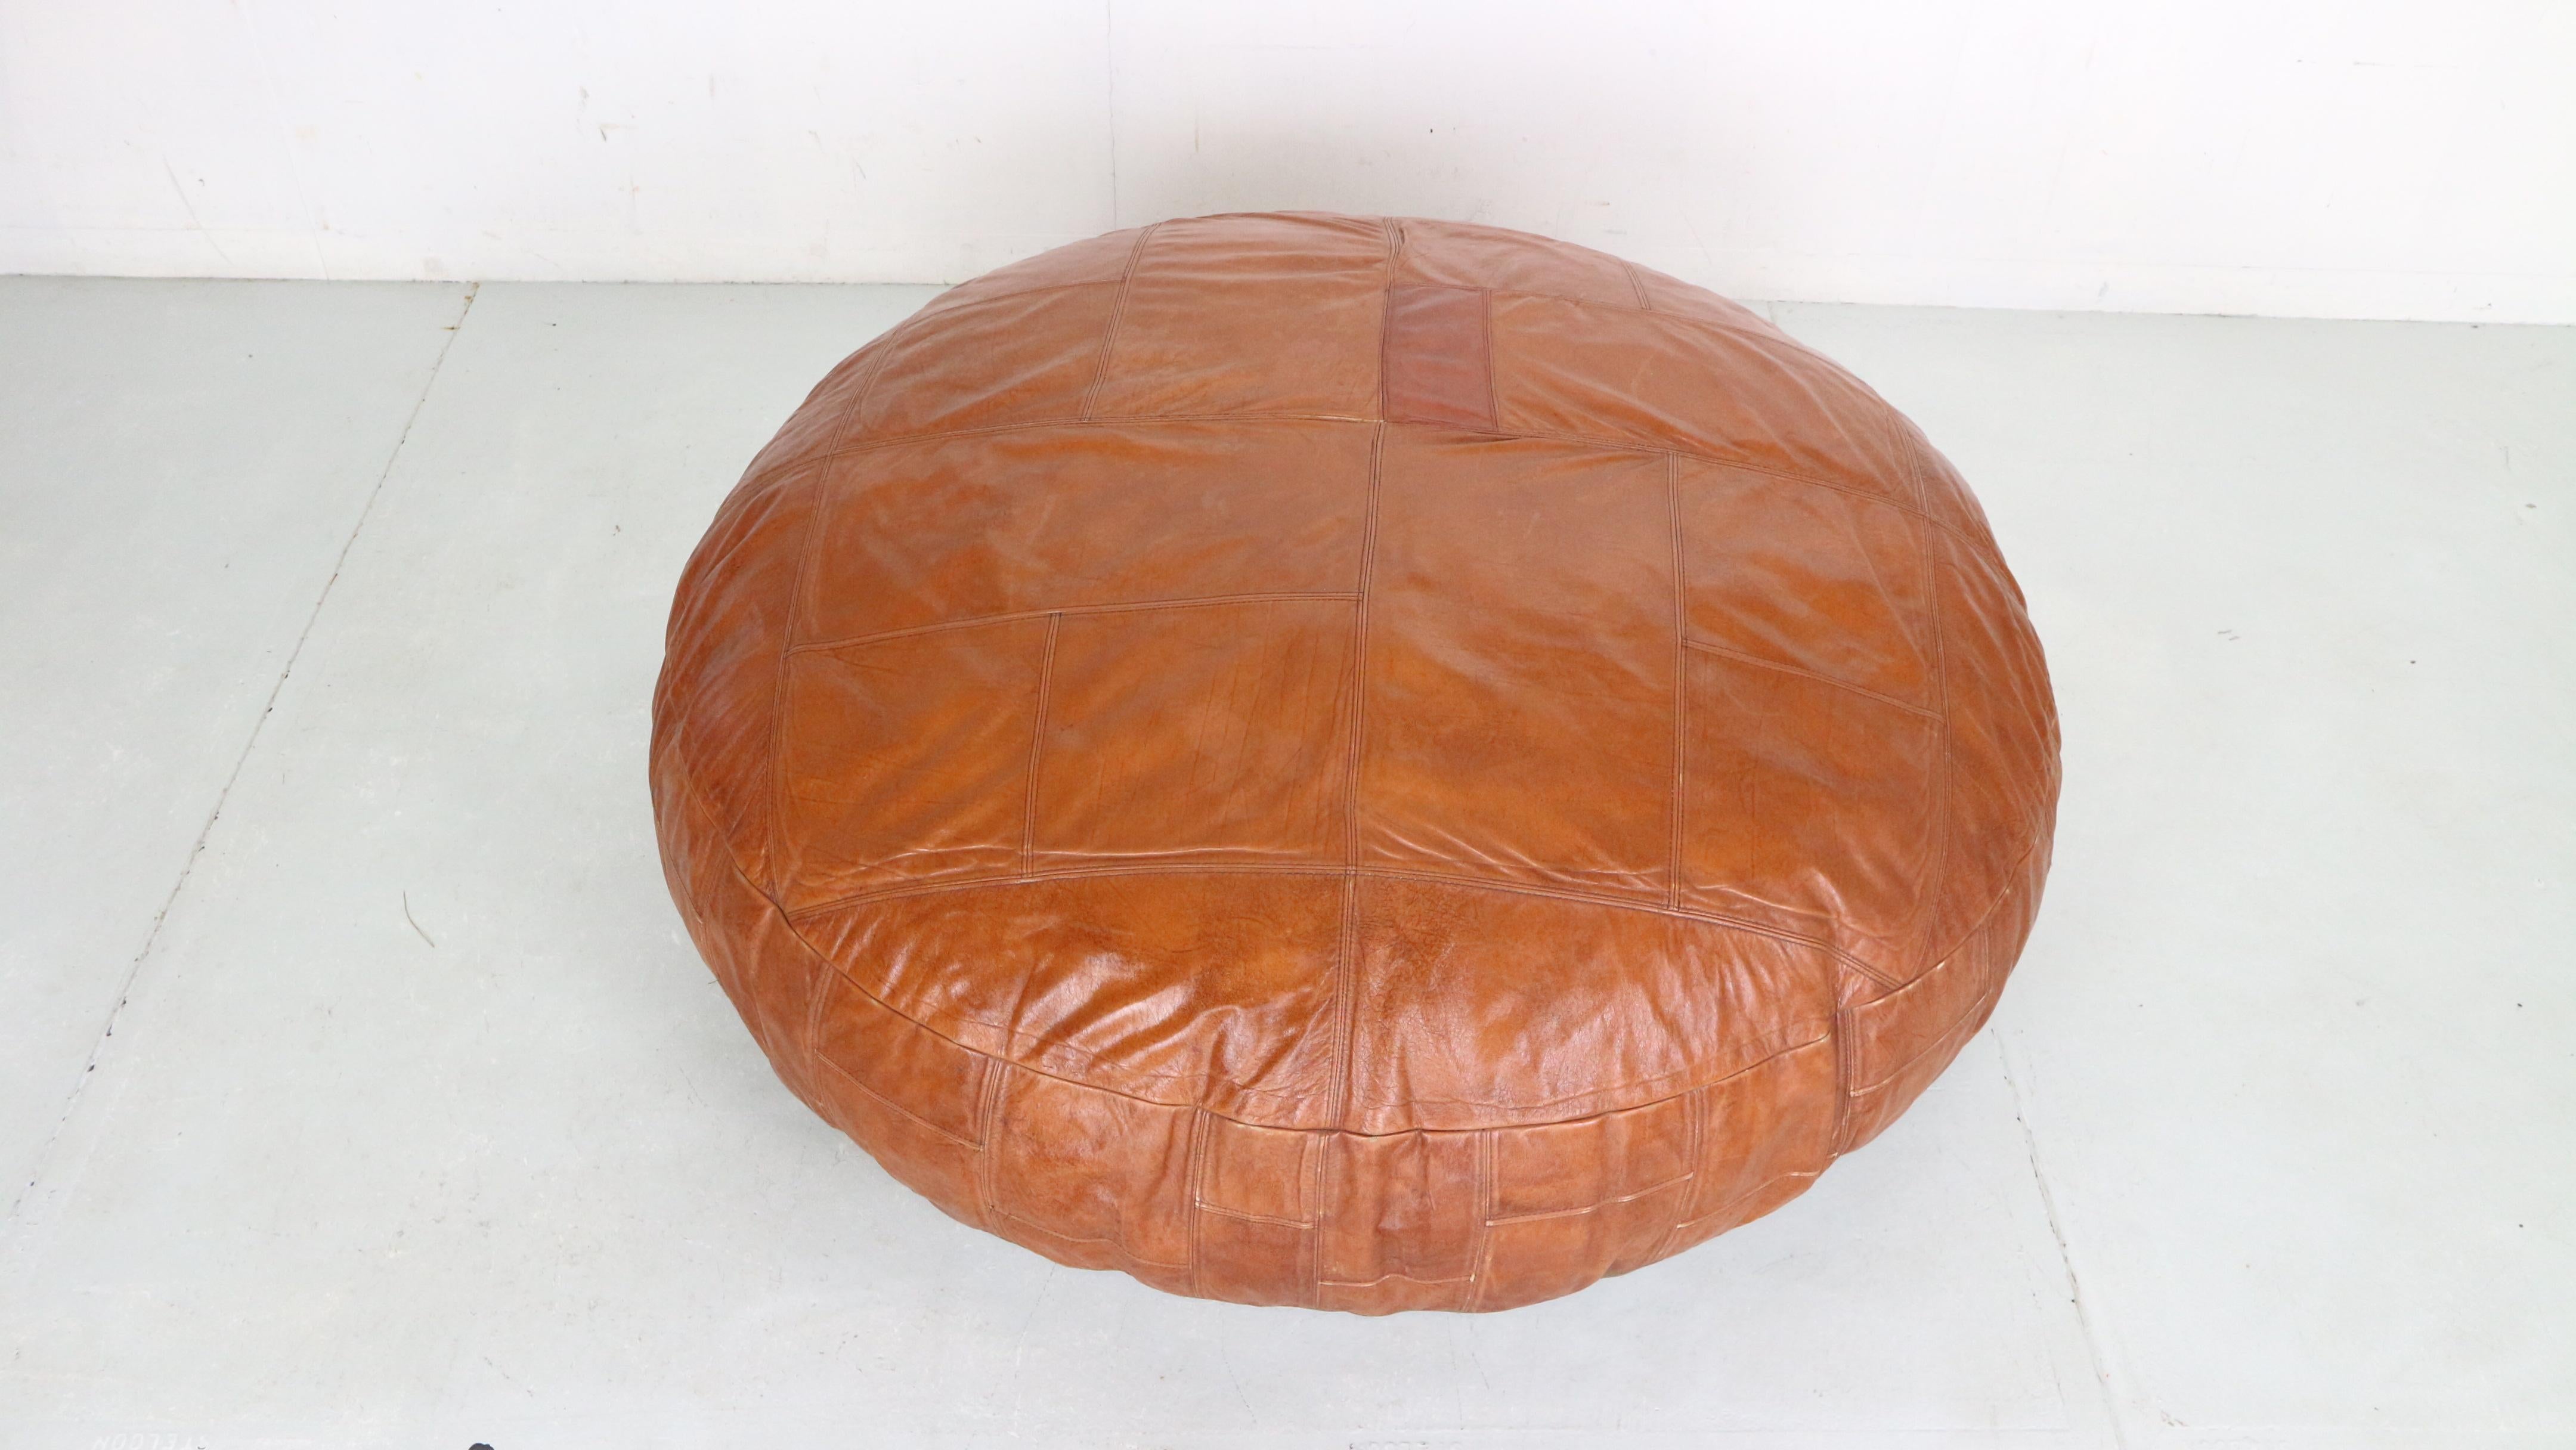 Mid century modern period cognac brown leather xxl pouf/ ottoman made in 1960's period.

XXXL (51 inch, 130cm) 

It’s style is a lot like the designs by Swiss company De Sede who is famous for their impressive leather work. 
The patchwork